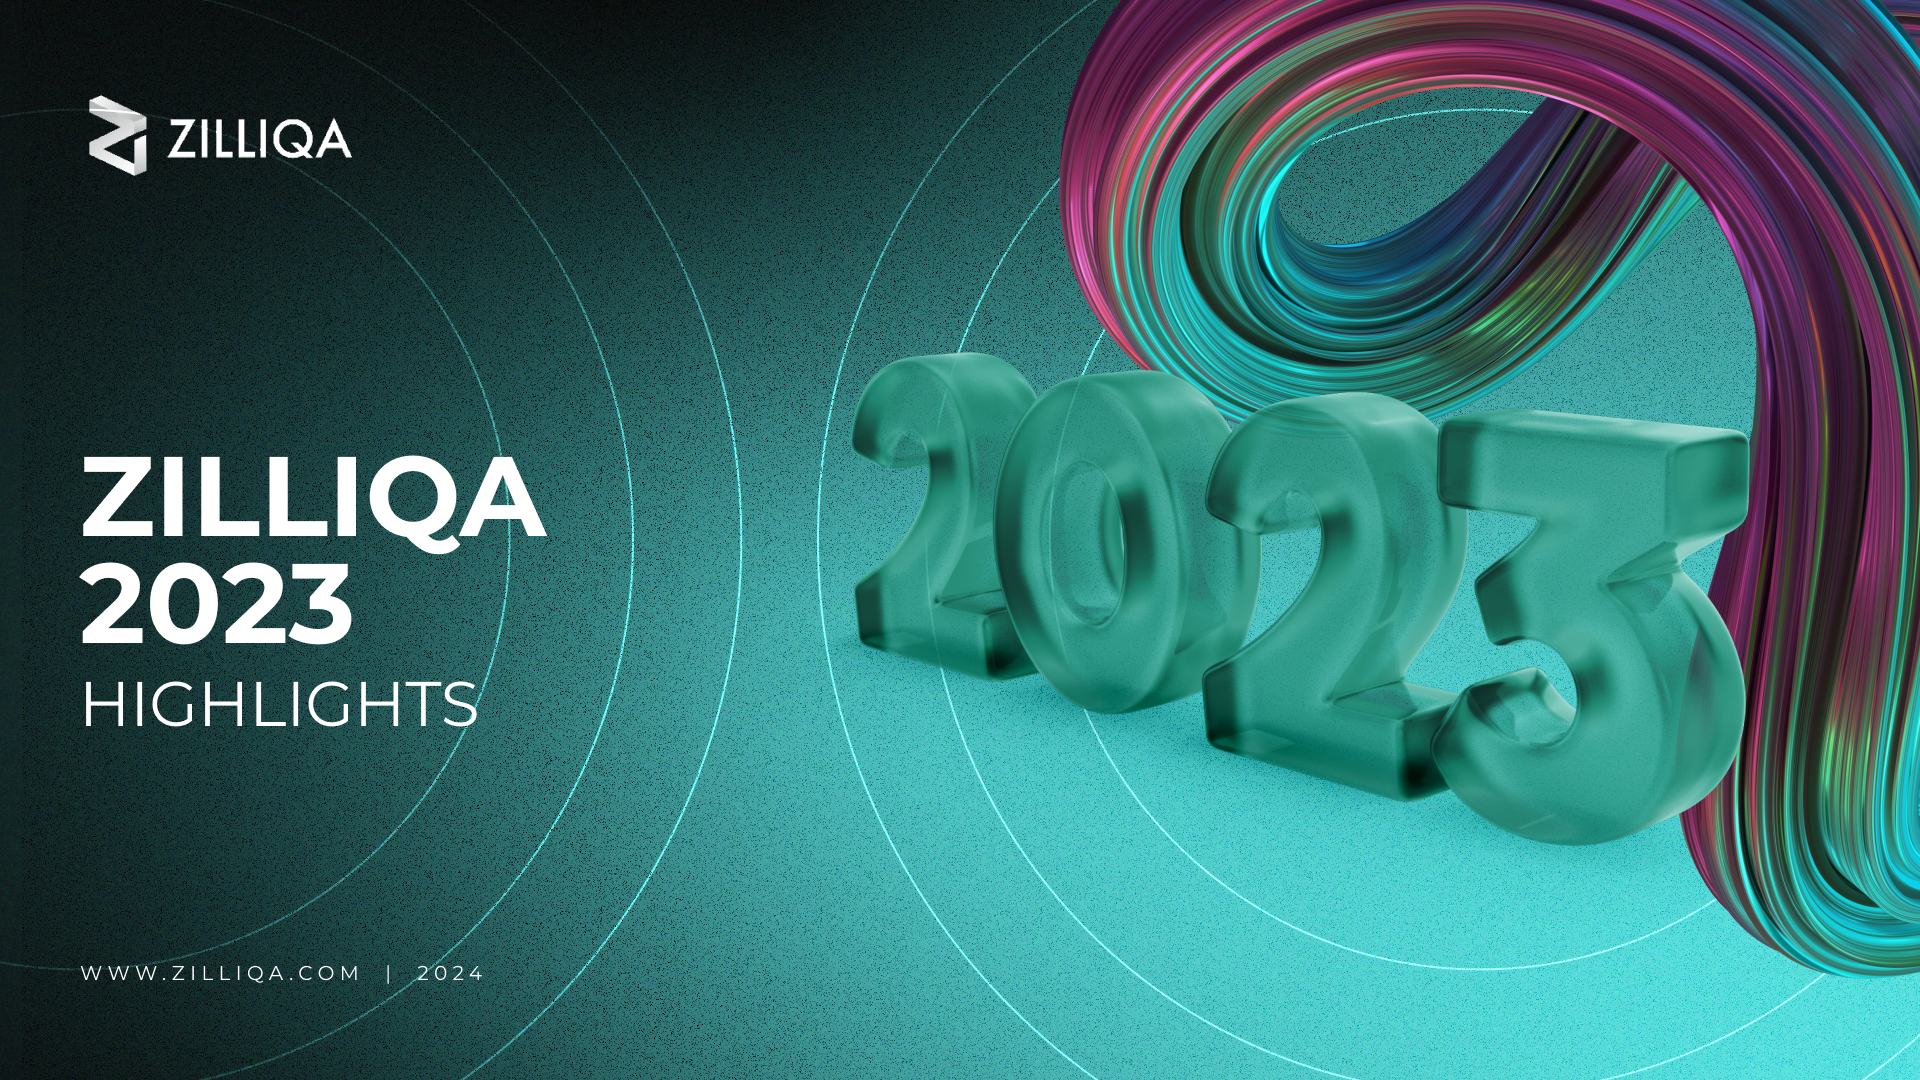 A look back at Zilliqa's biggest achievements in 2023